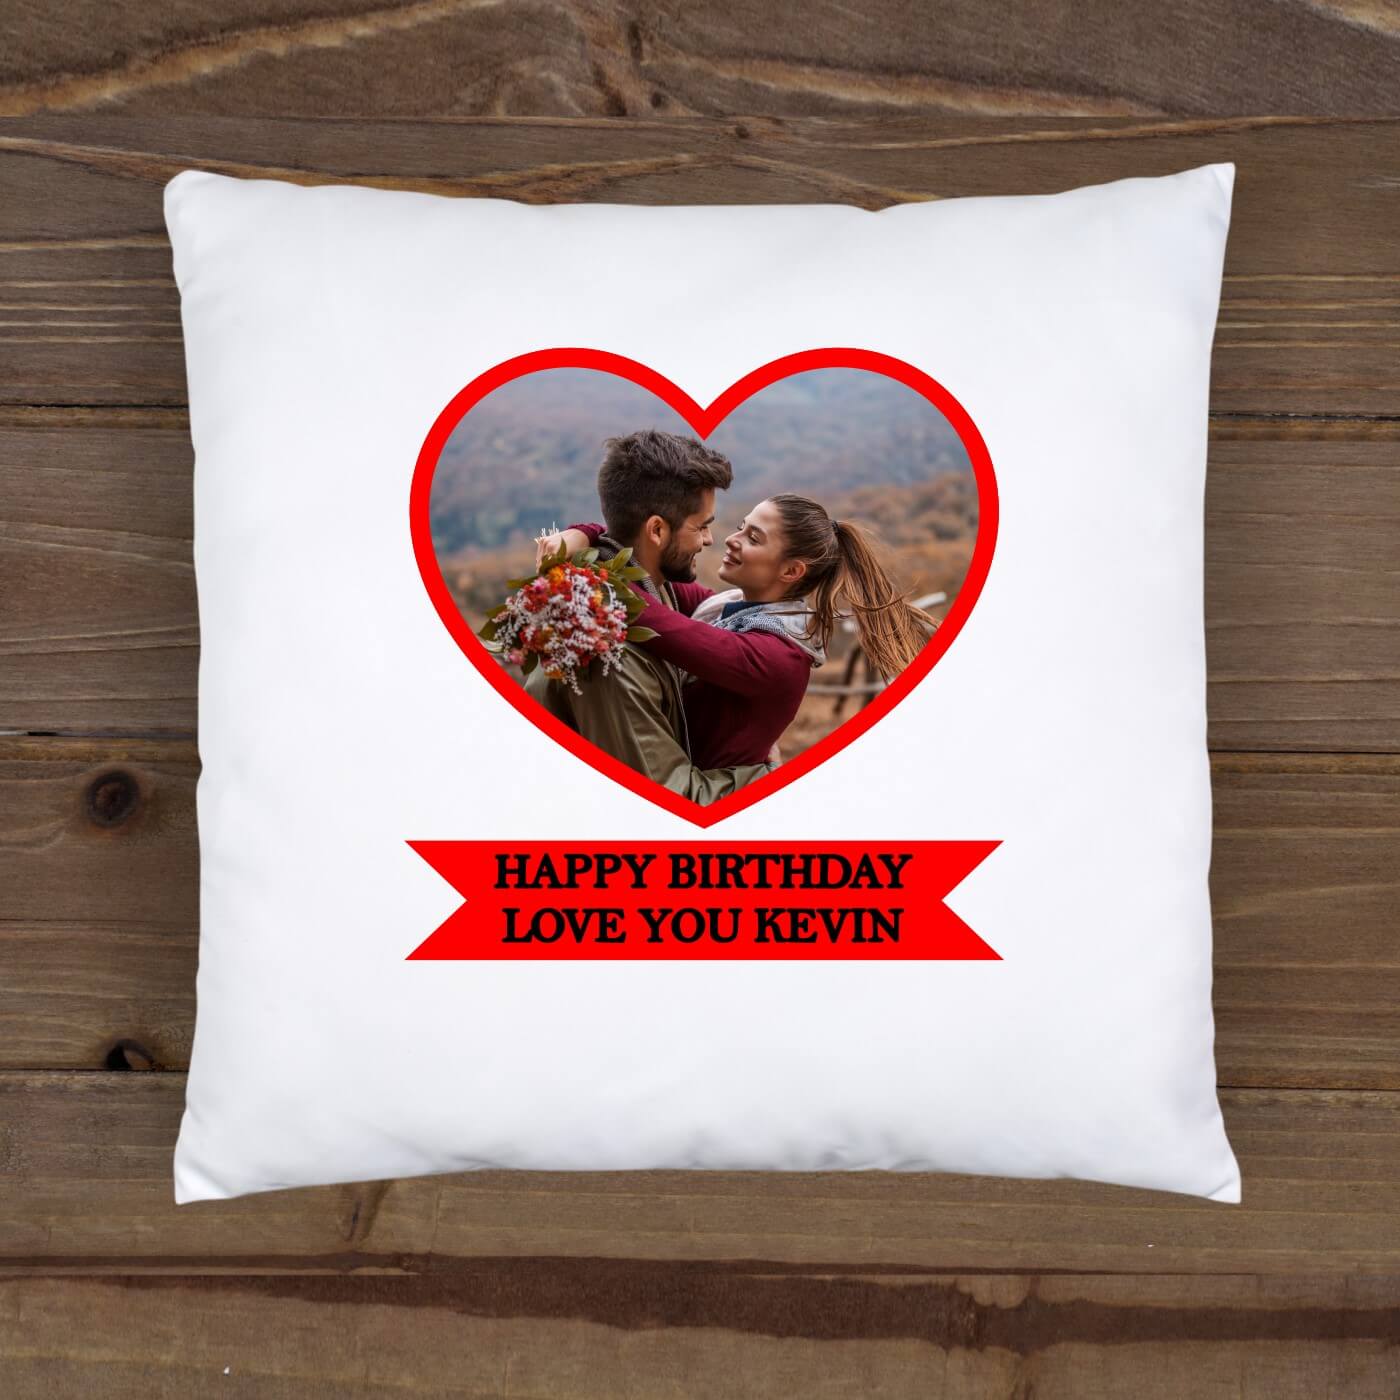 Personalised Cushion Cover - Heart & Ribbon